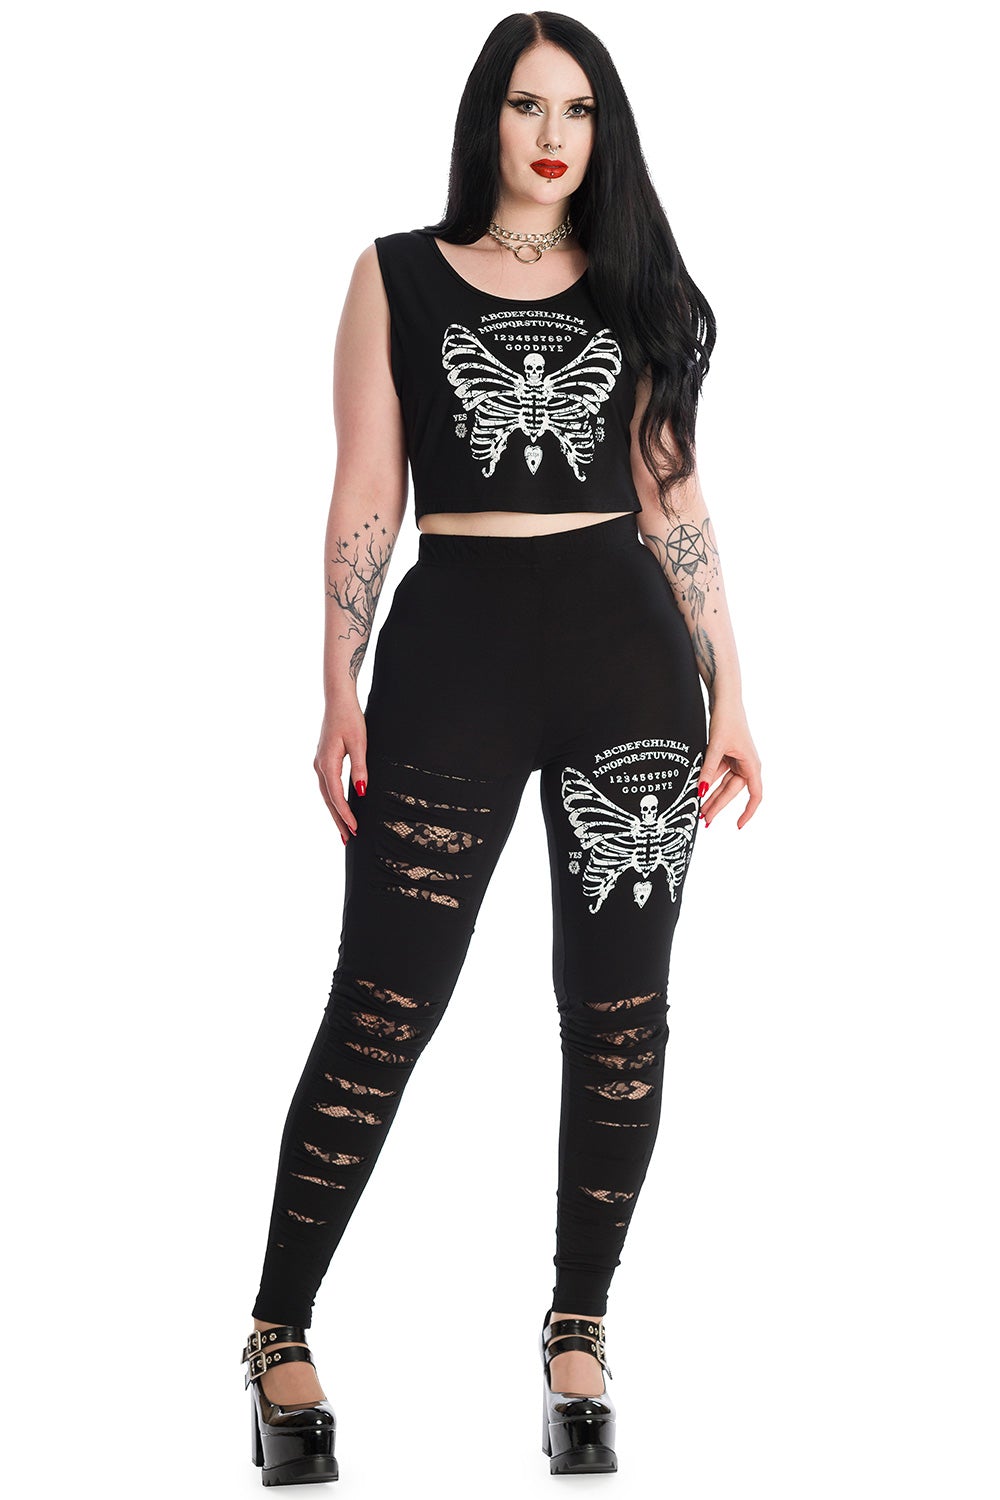 Model wearing Black high waisted leggings with rips on both legs with lace underneath. Skeleton butterfly with ouija print on left thigh with matching crop top